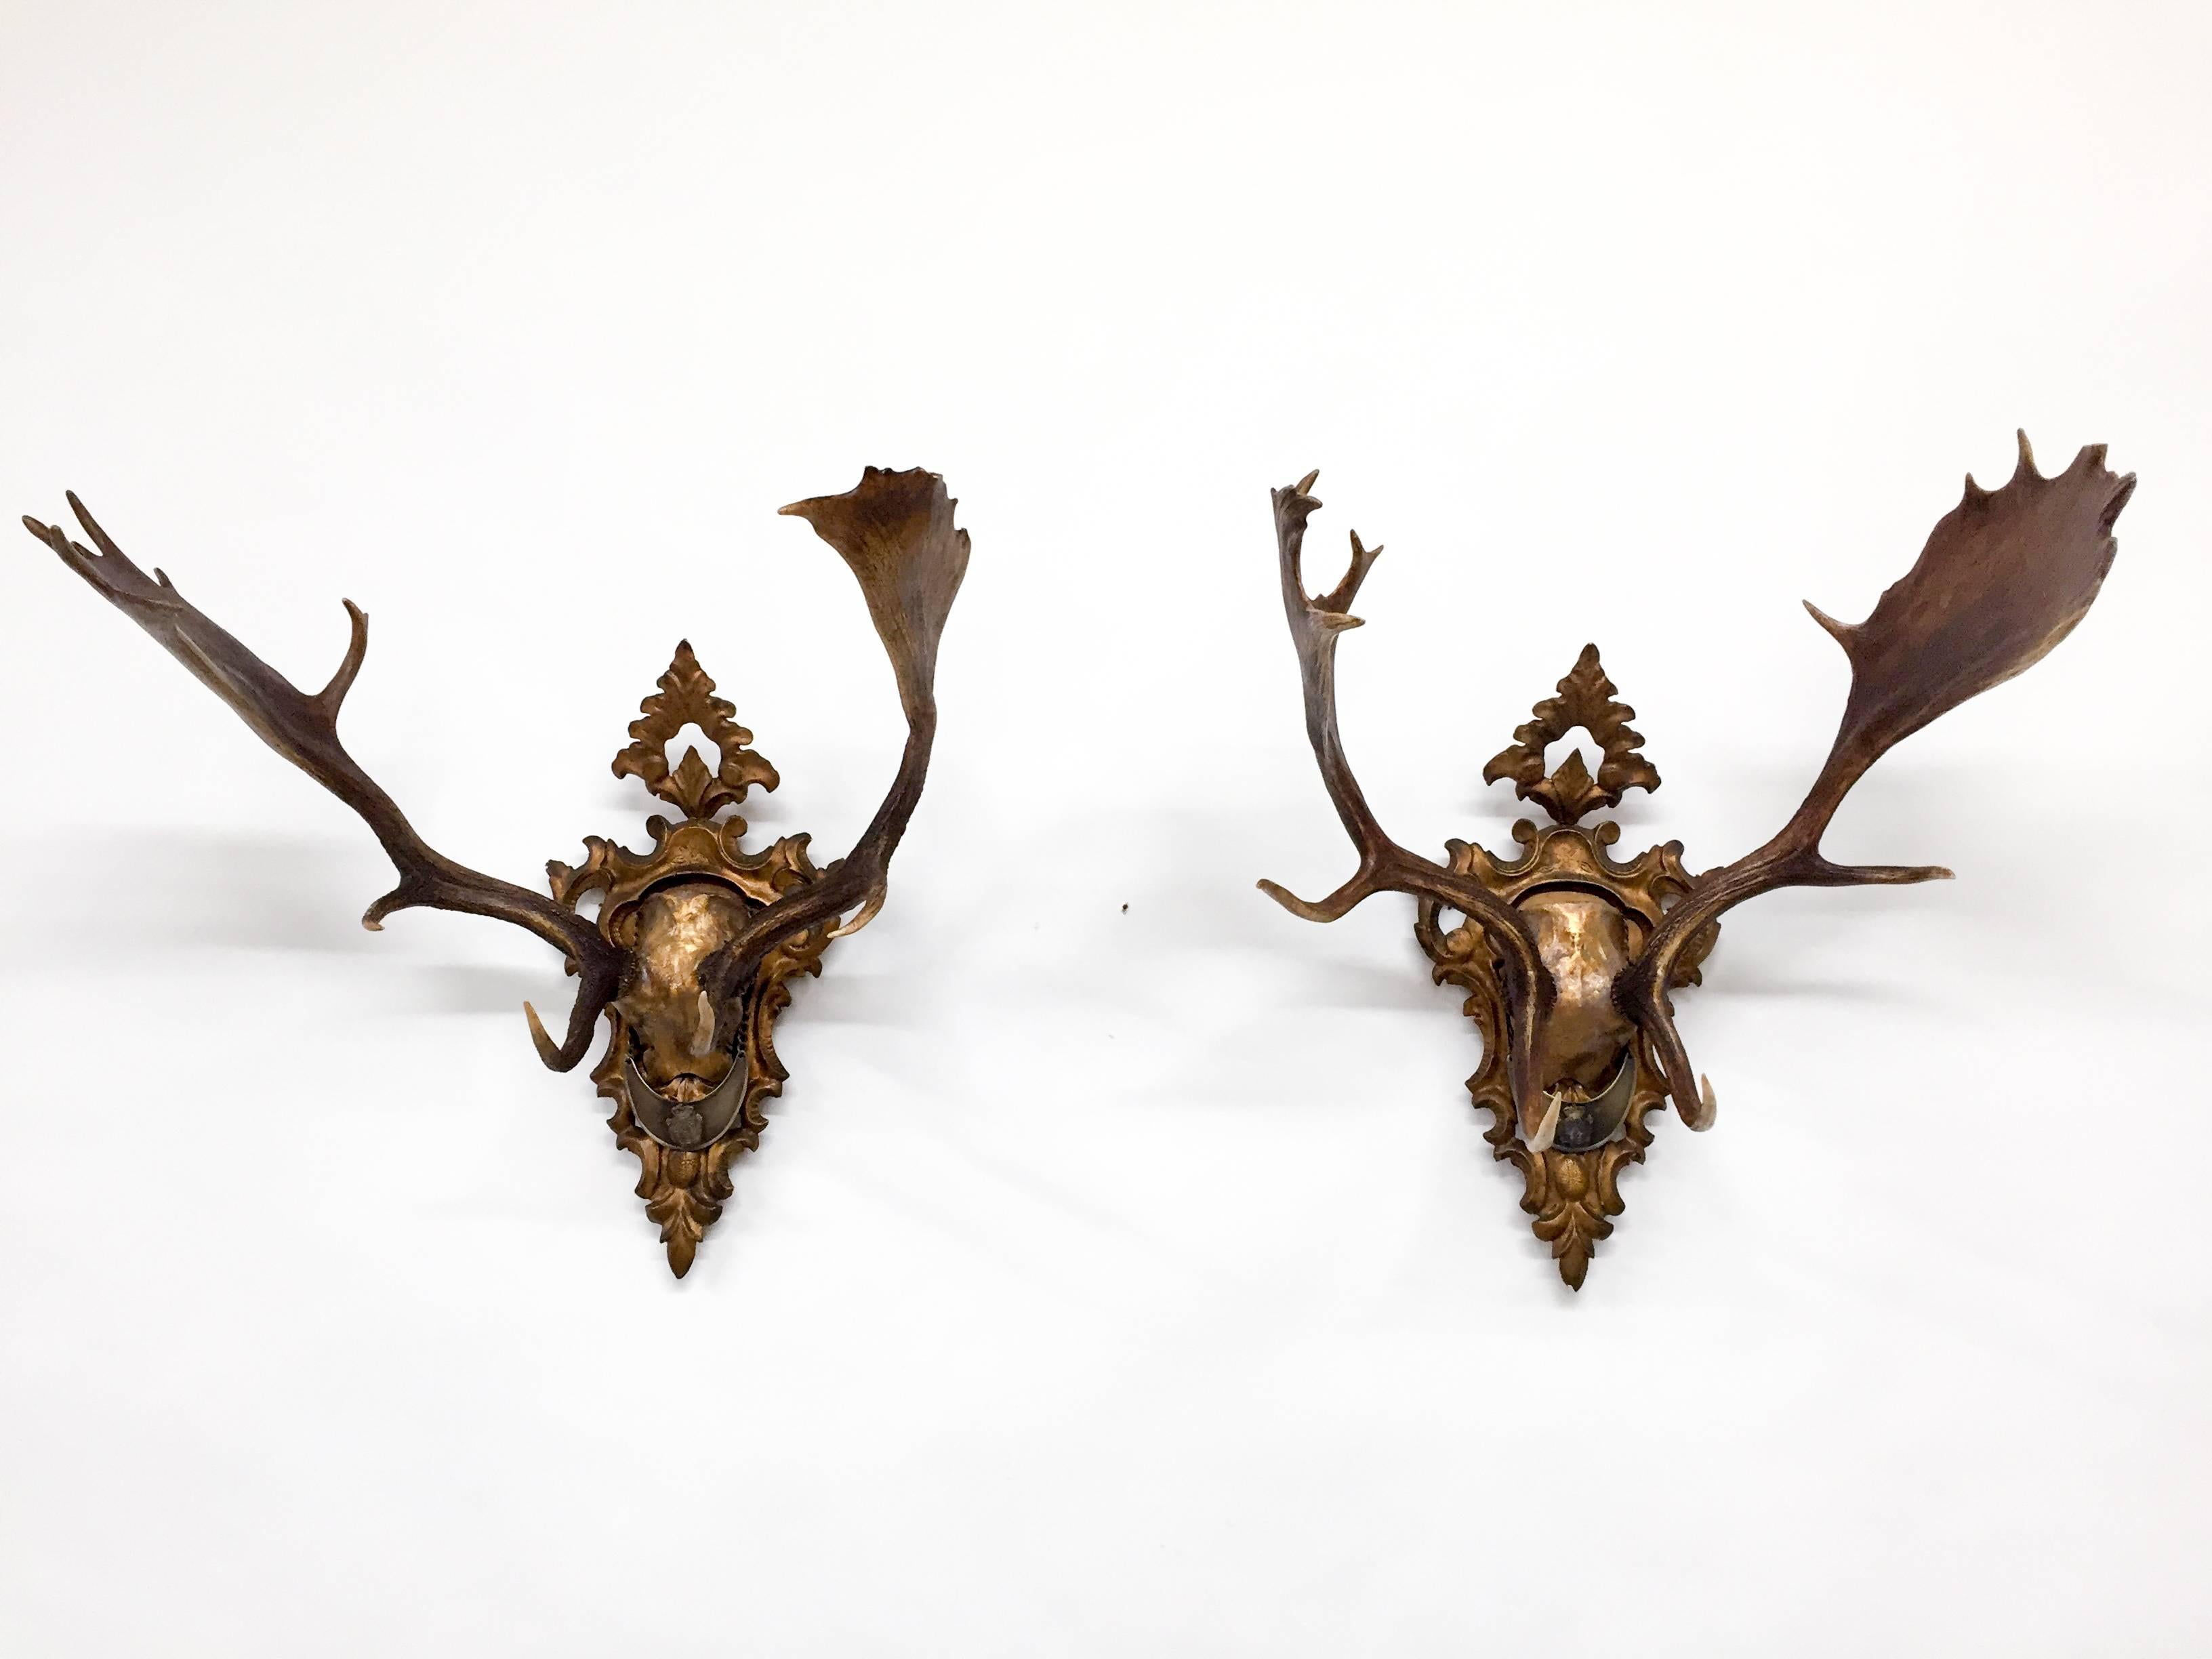 Pair of 19th century Habsburg Fallow Deer trophies from Emperor Franz Josef's castle at Eckartsau in the Southern Austrian Alps, a favourite hunting schloss of the Habsburg Royal family. Each of these two historic hunting trophies features the